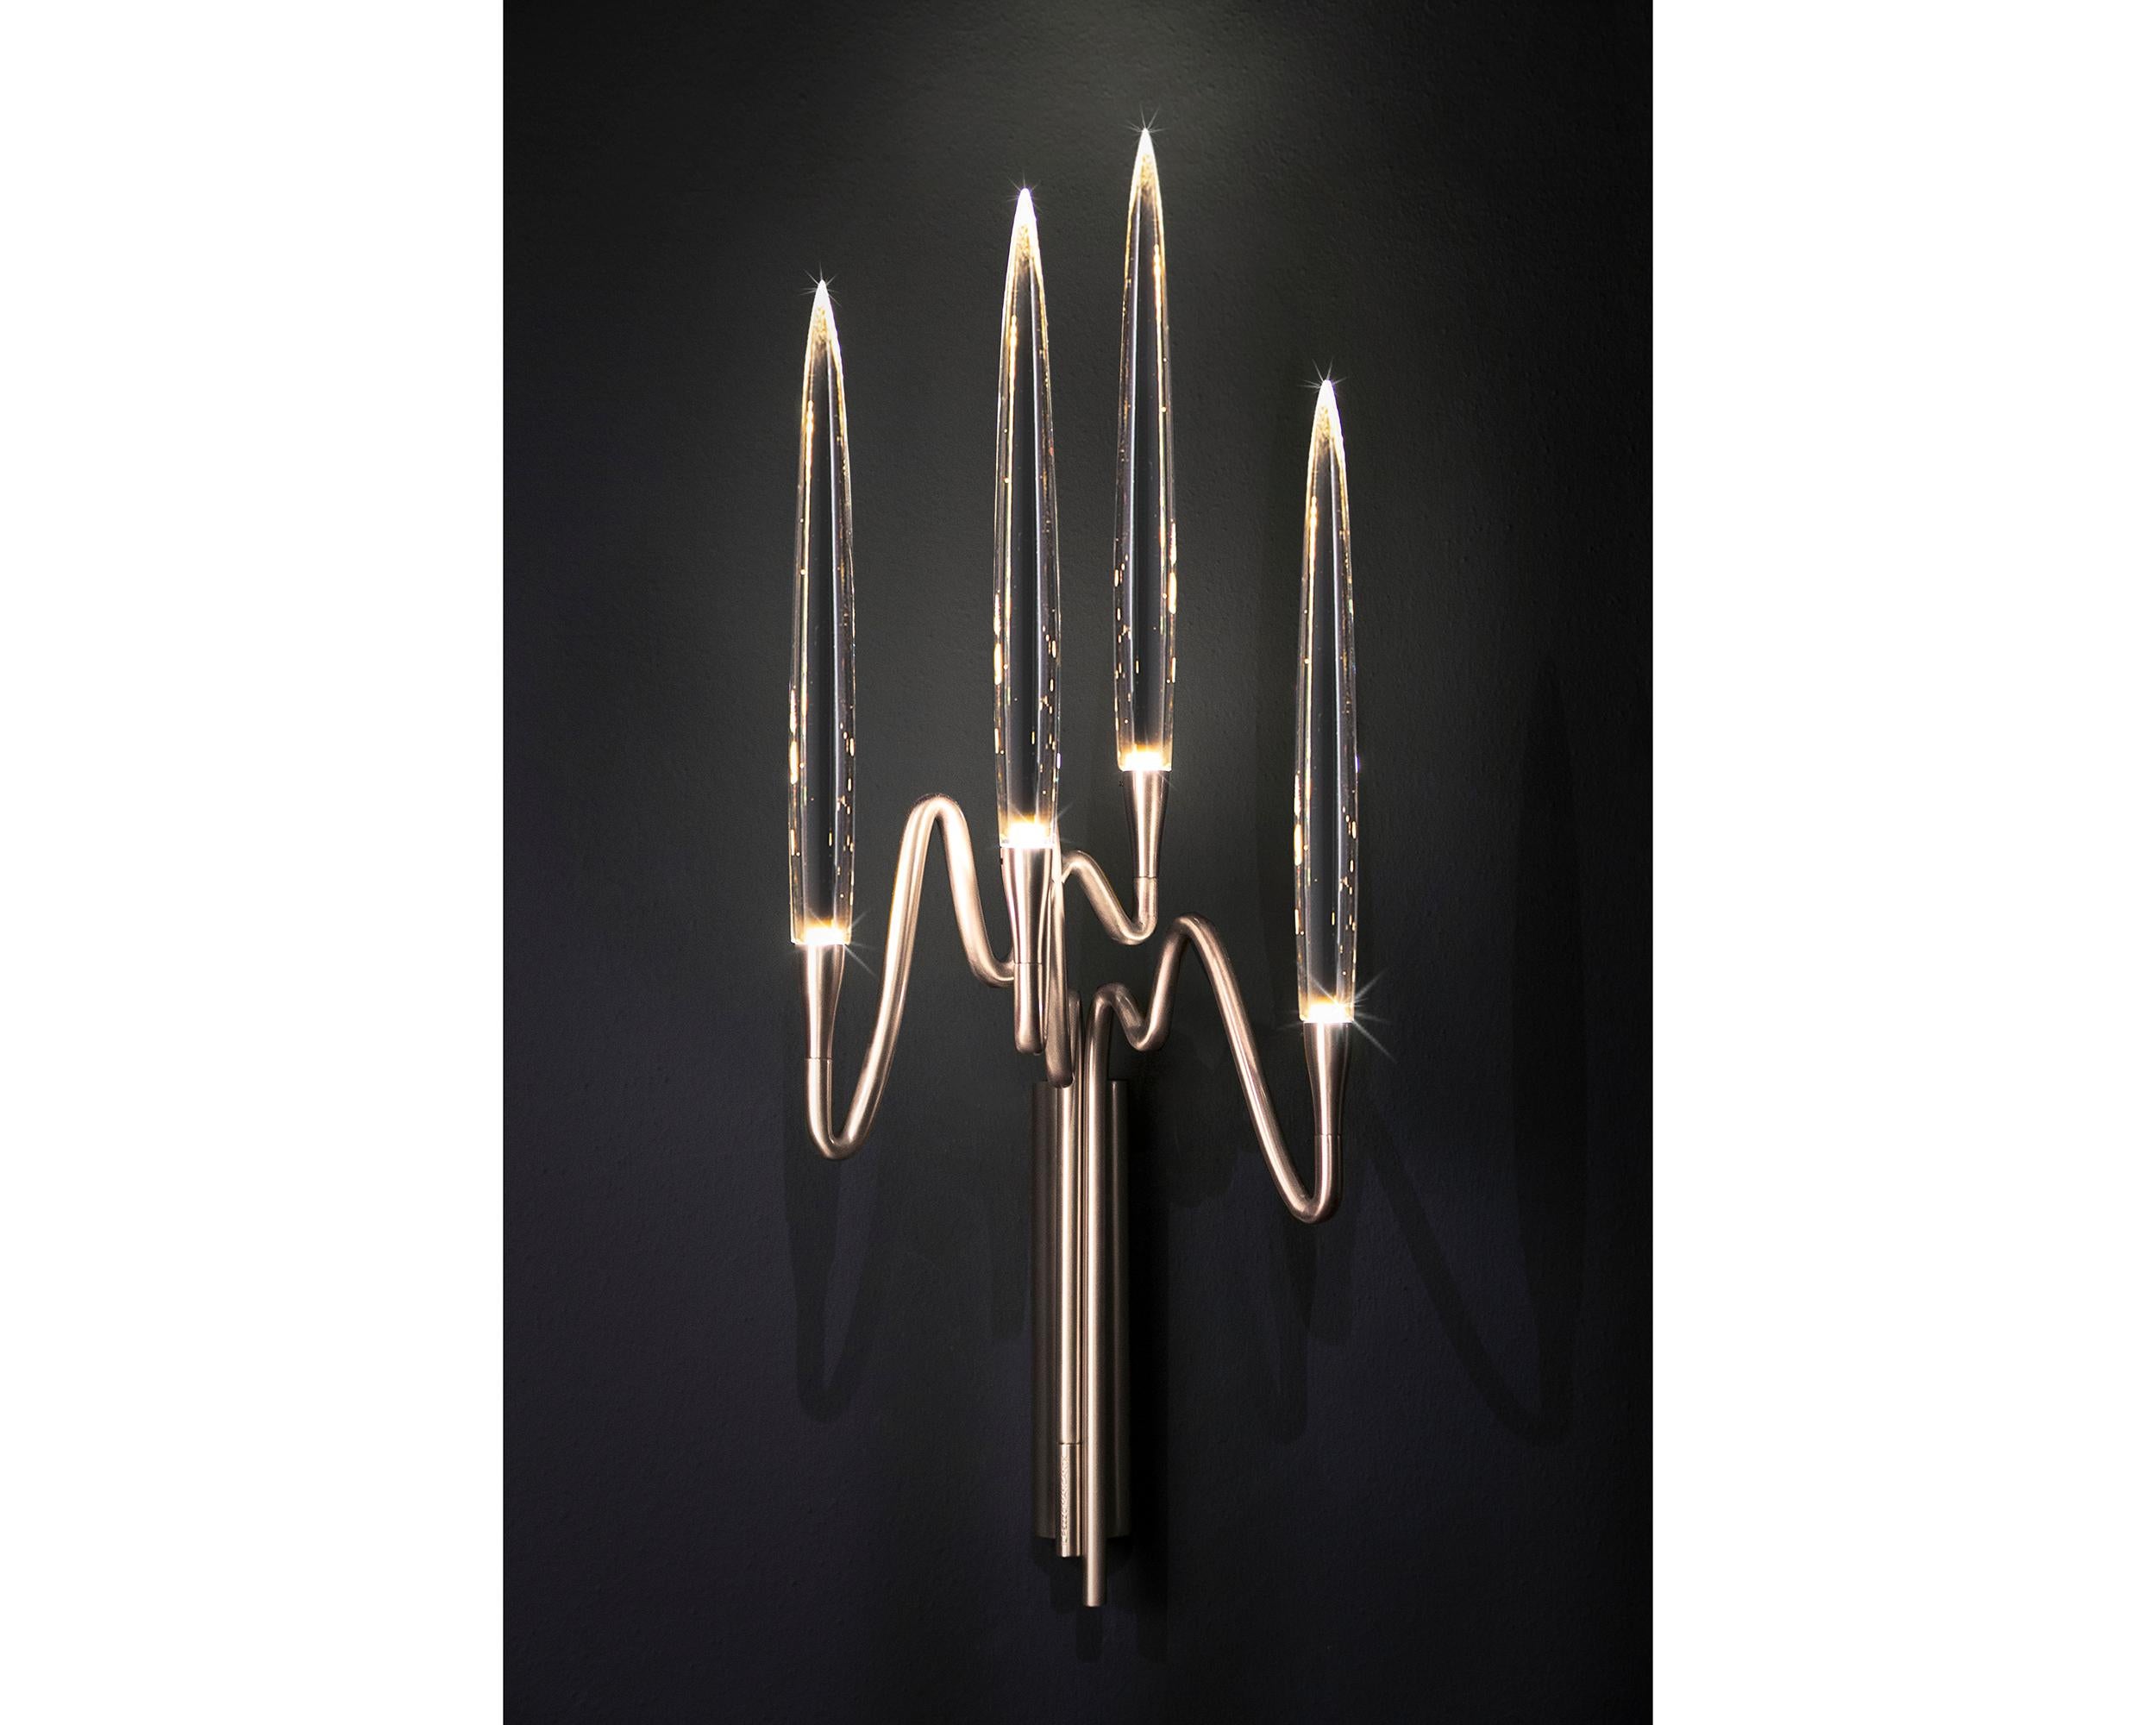 Inspired by Arabic calligraphic art and the icon of the classical candelabrum is Il Pezzo 3, a collection of lamps with a hand-forged brass structure and elegant “candles” crafted from hand blown crystal, according to the noble Tuscan artisan